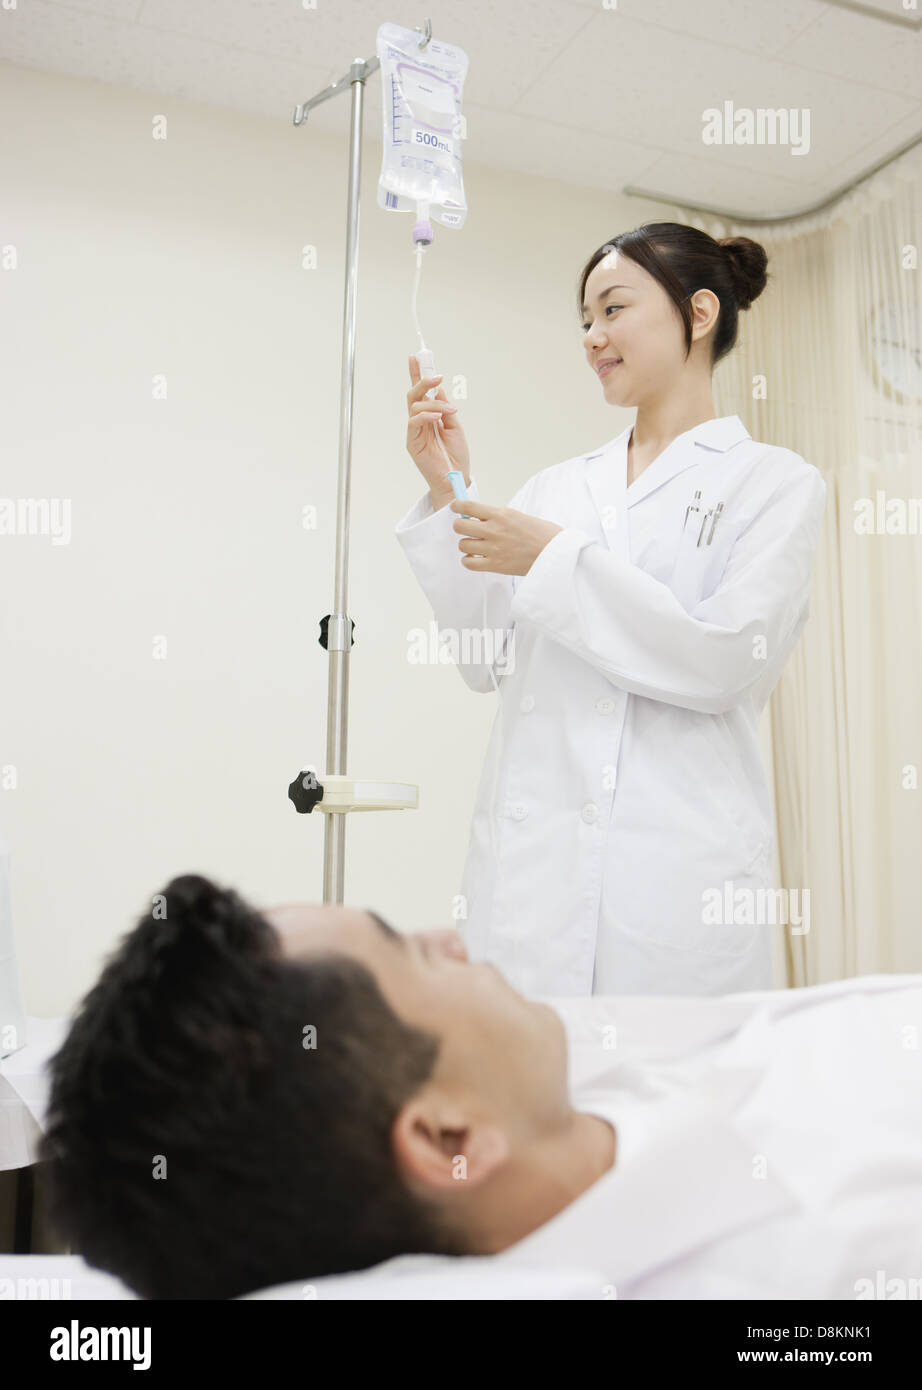 Medical technologist and patient Stock Photo